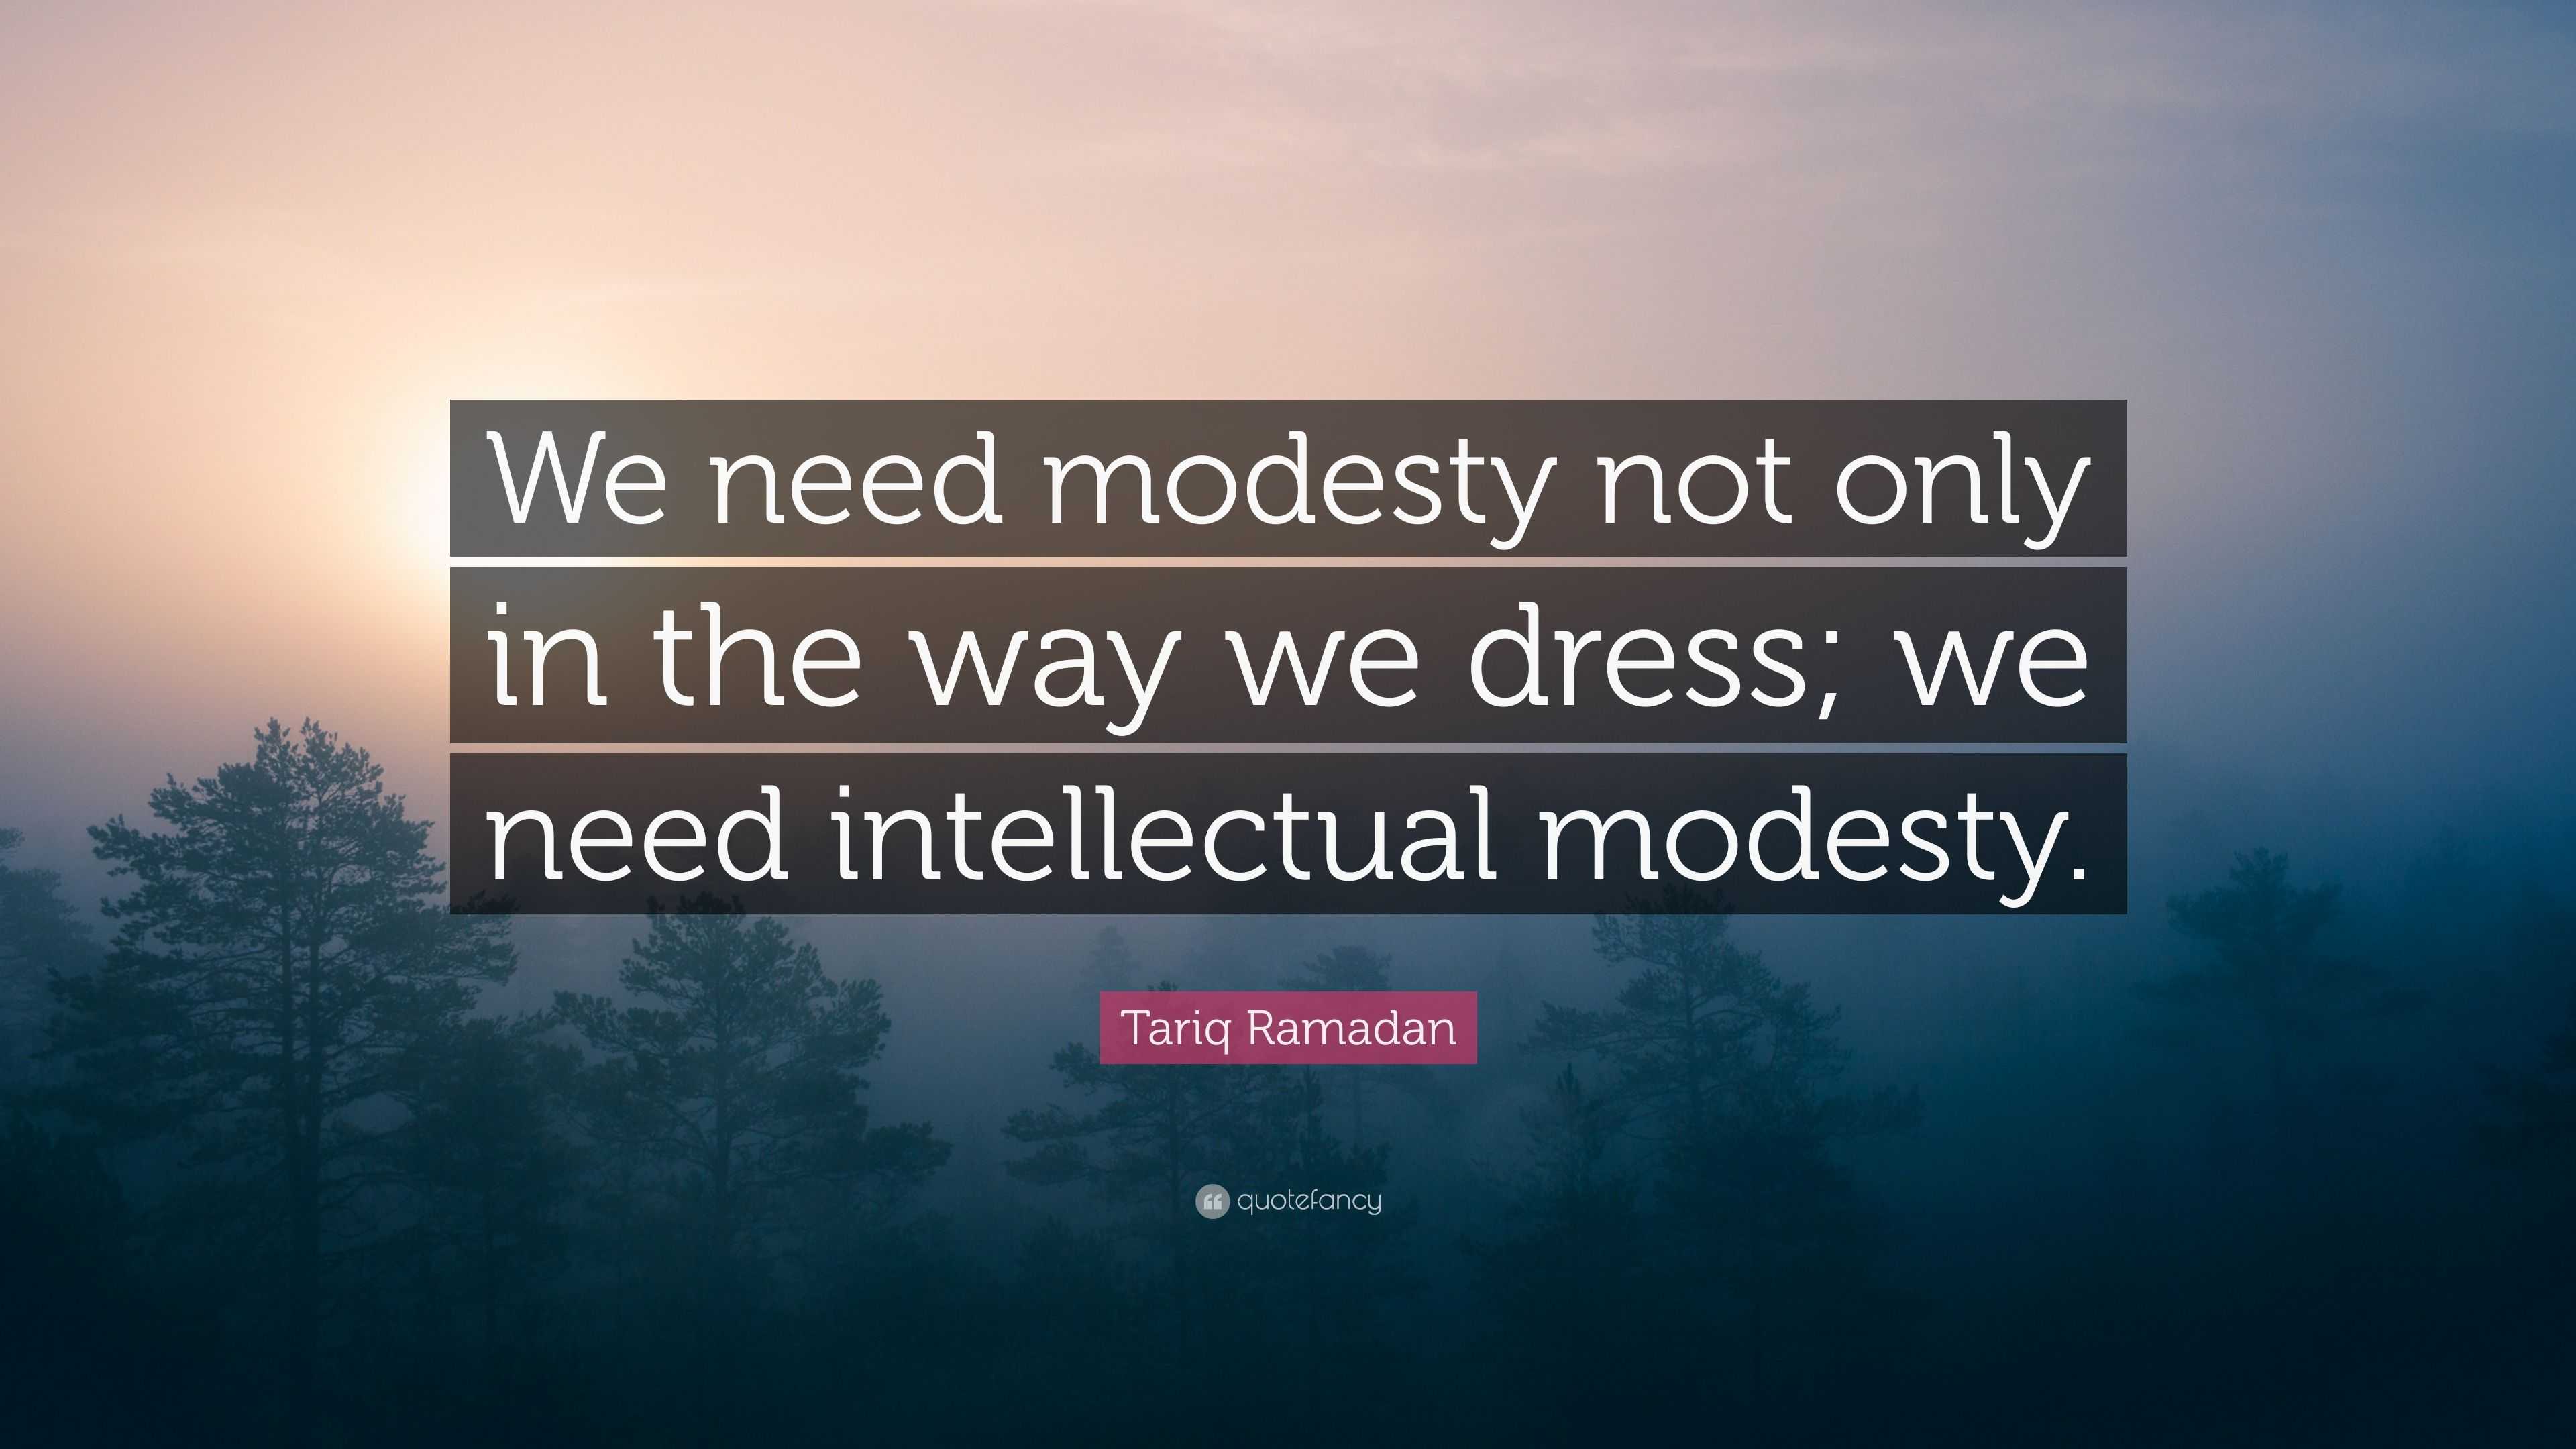 Tariq Ramadan Quote “We need modesty not only in the way we dress; we